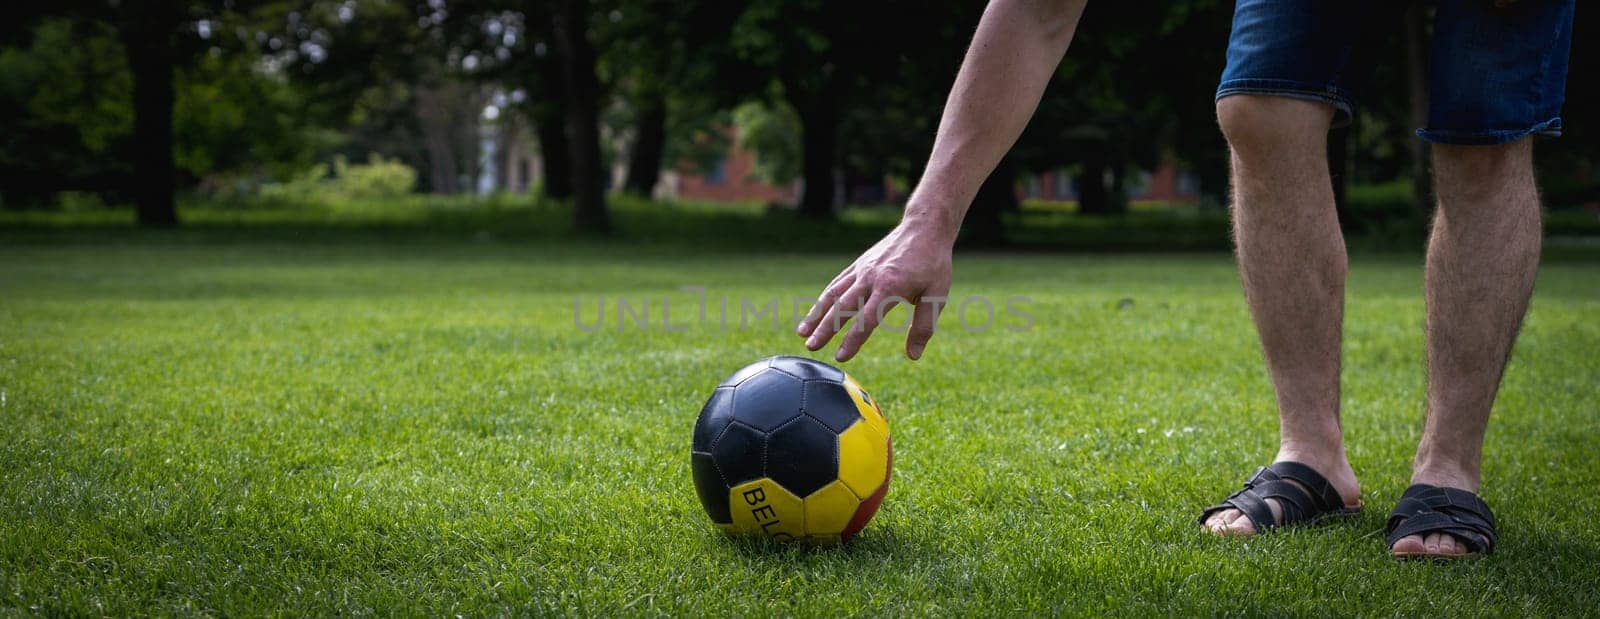 An unrecognizable young man Caucasian man reaches for a soccer ball with Belgium written on it, lying on the green lawn of a city park on a summer day, close-up view from the side.